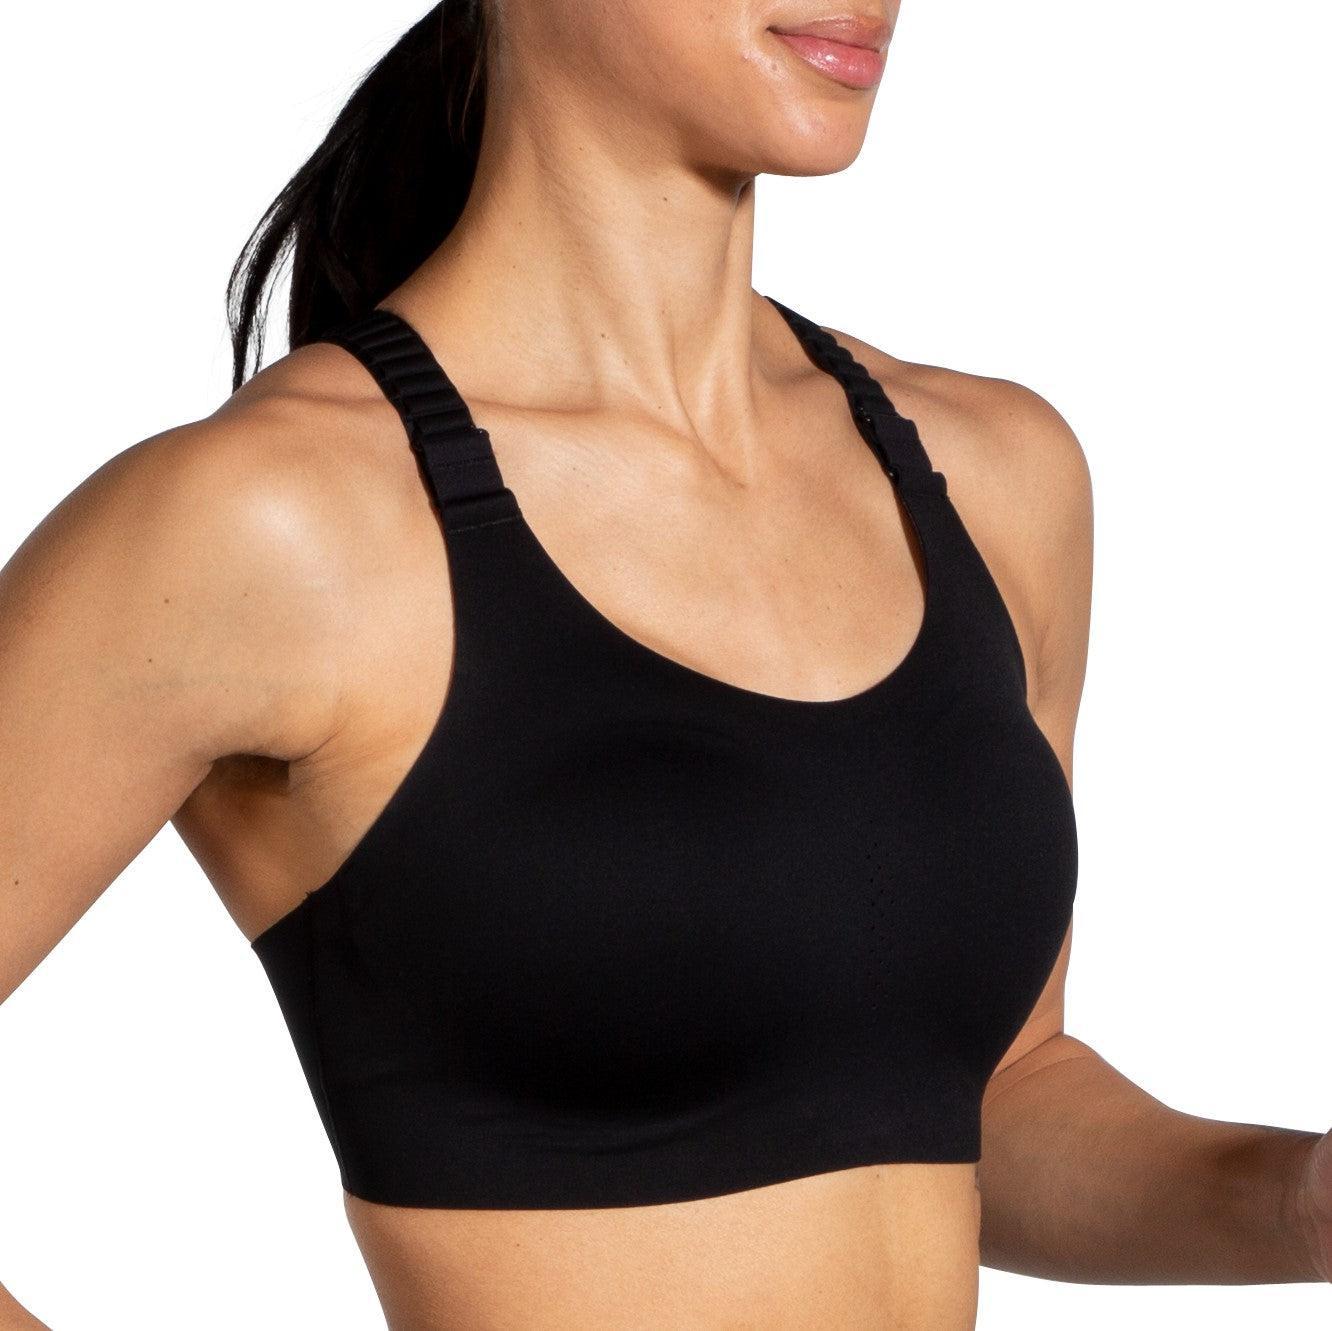 Up To 67% Off on Women's Wide Strap Racerback